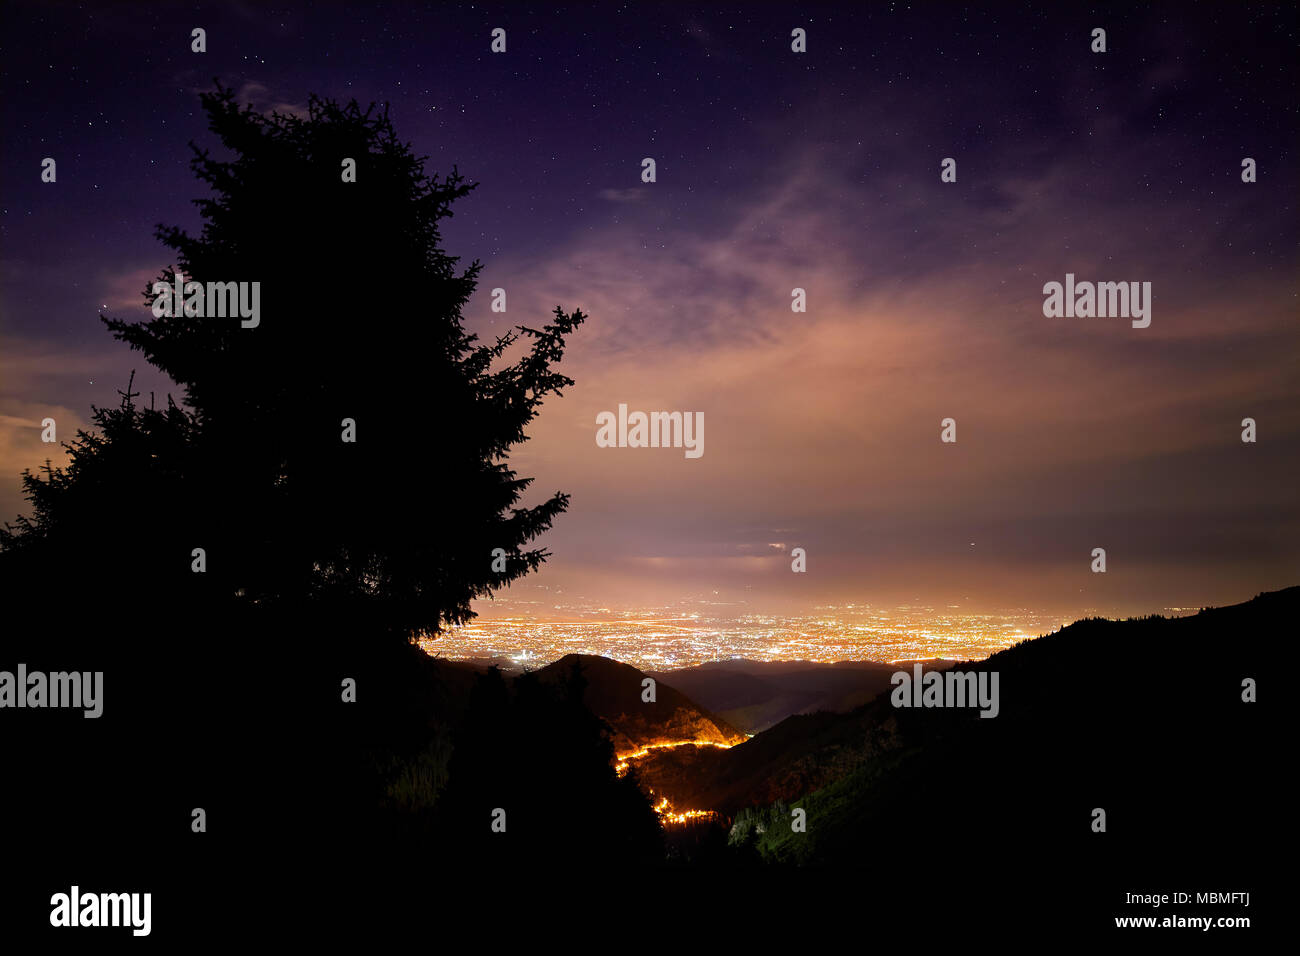 Night Landscape of city lights and tree at silhouette at cloudy sky with stars in Almaty, Kazakhstan Stock Photo